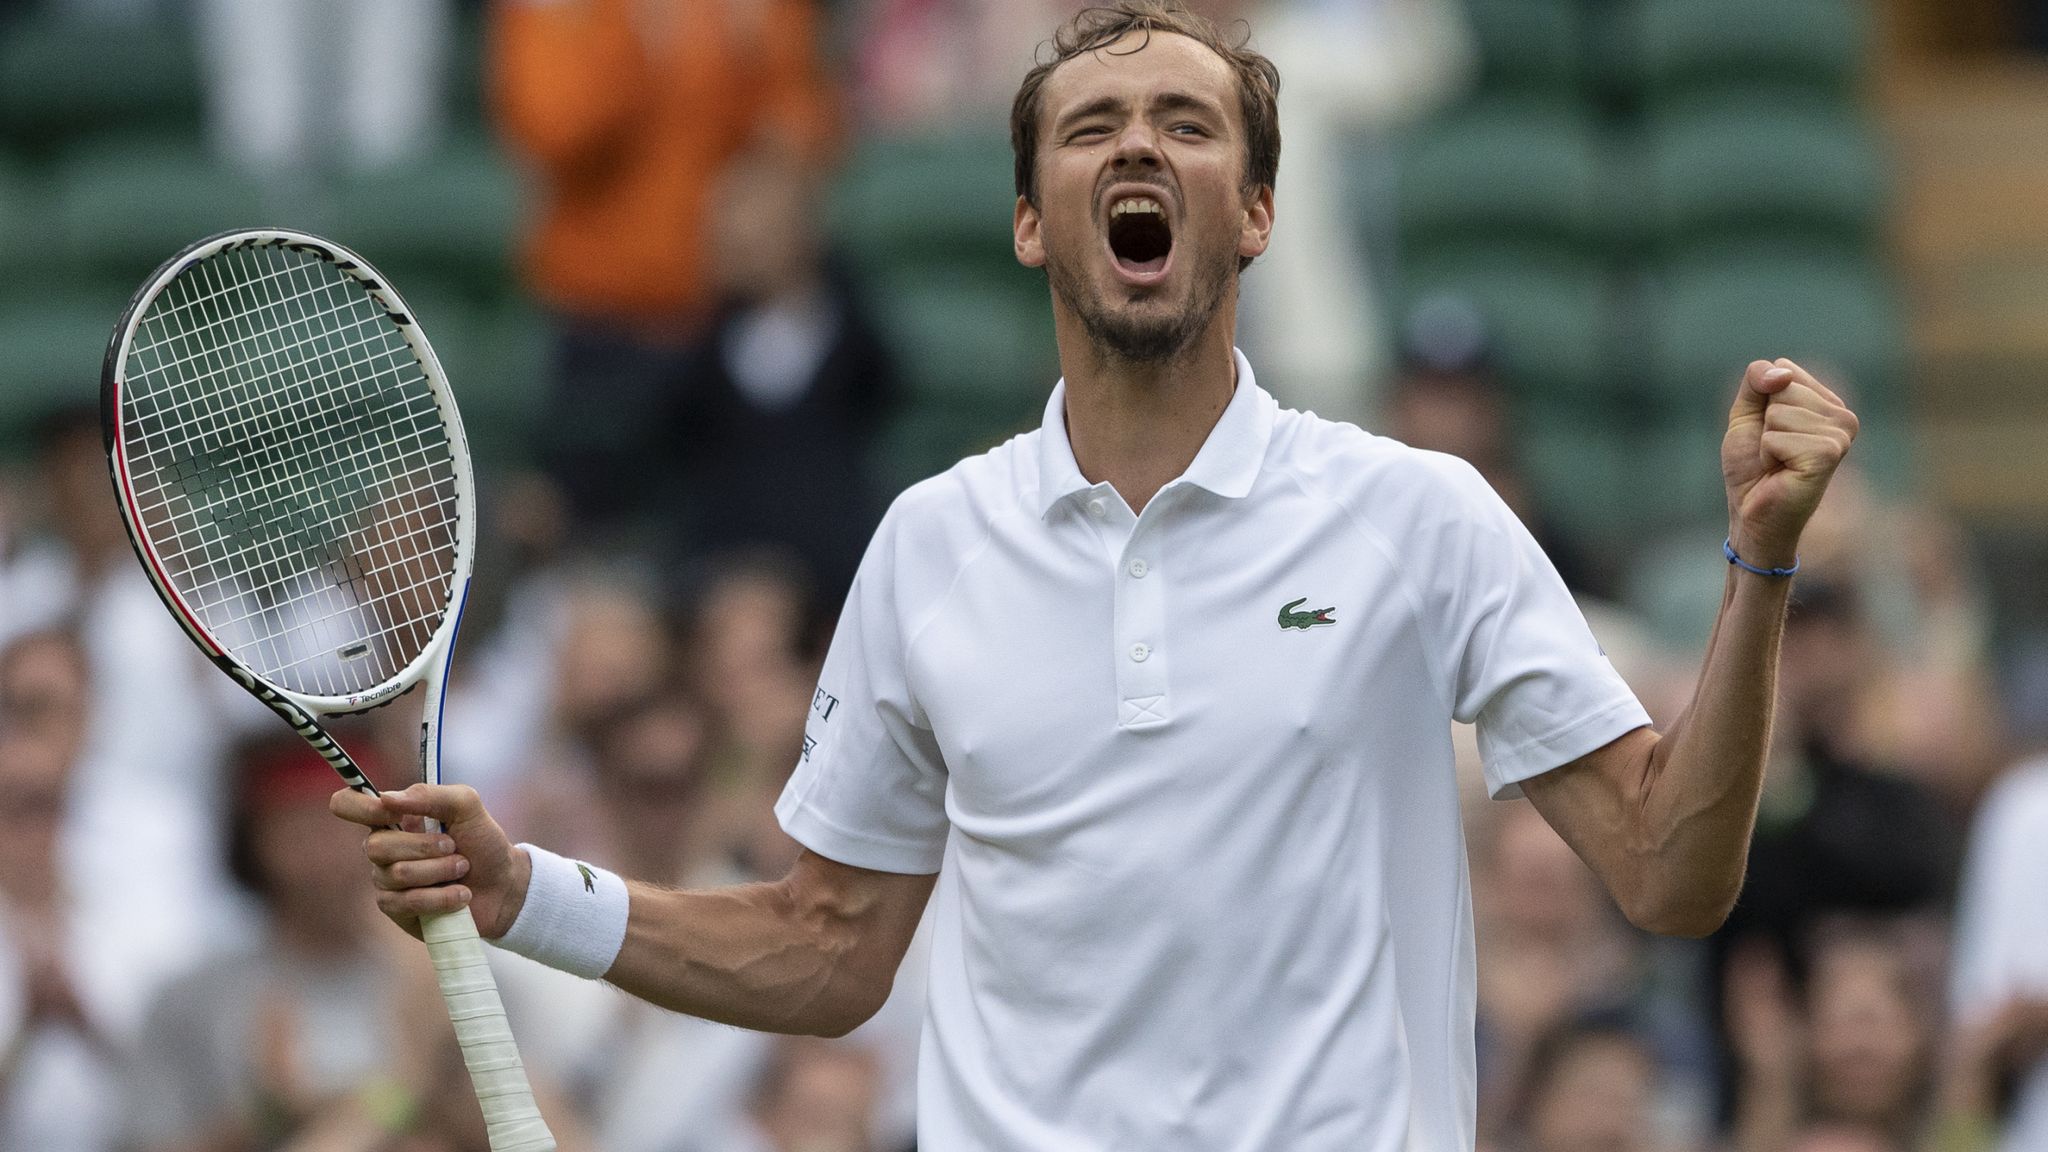 Wimbledon Daniil Medvedev not given up hope of competing despite ban on banned Russians and Belarusians Tennis News Sky Sports